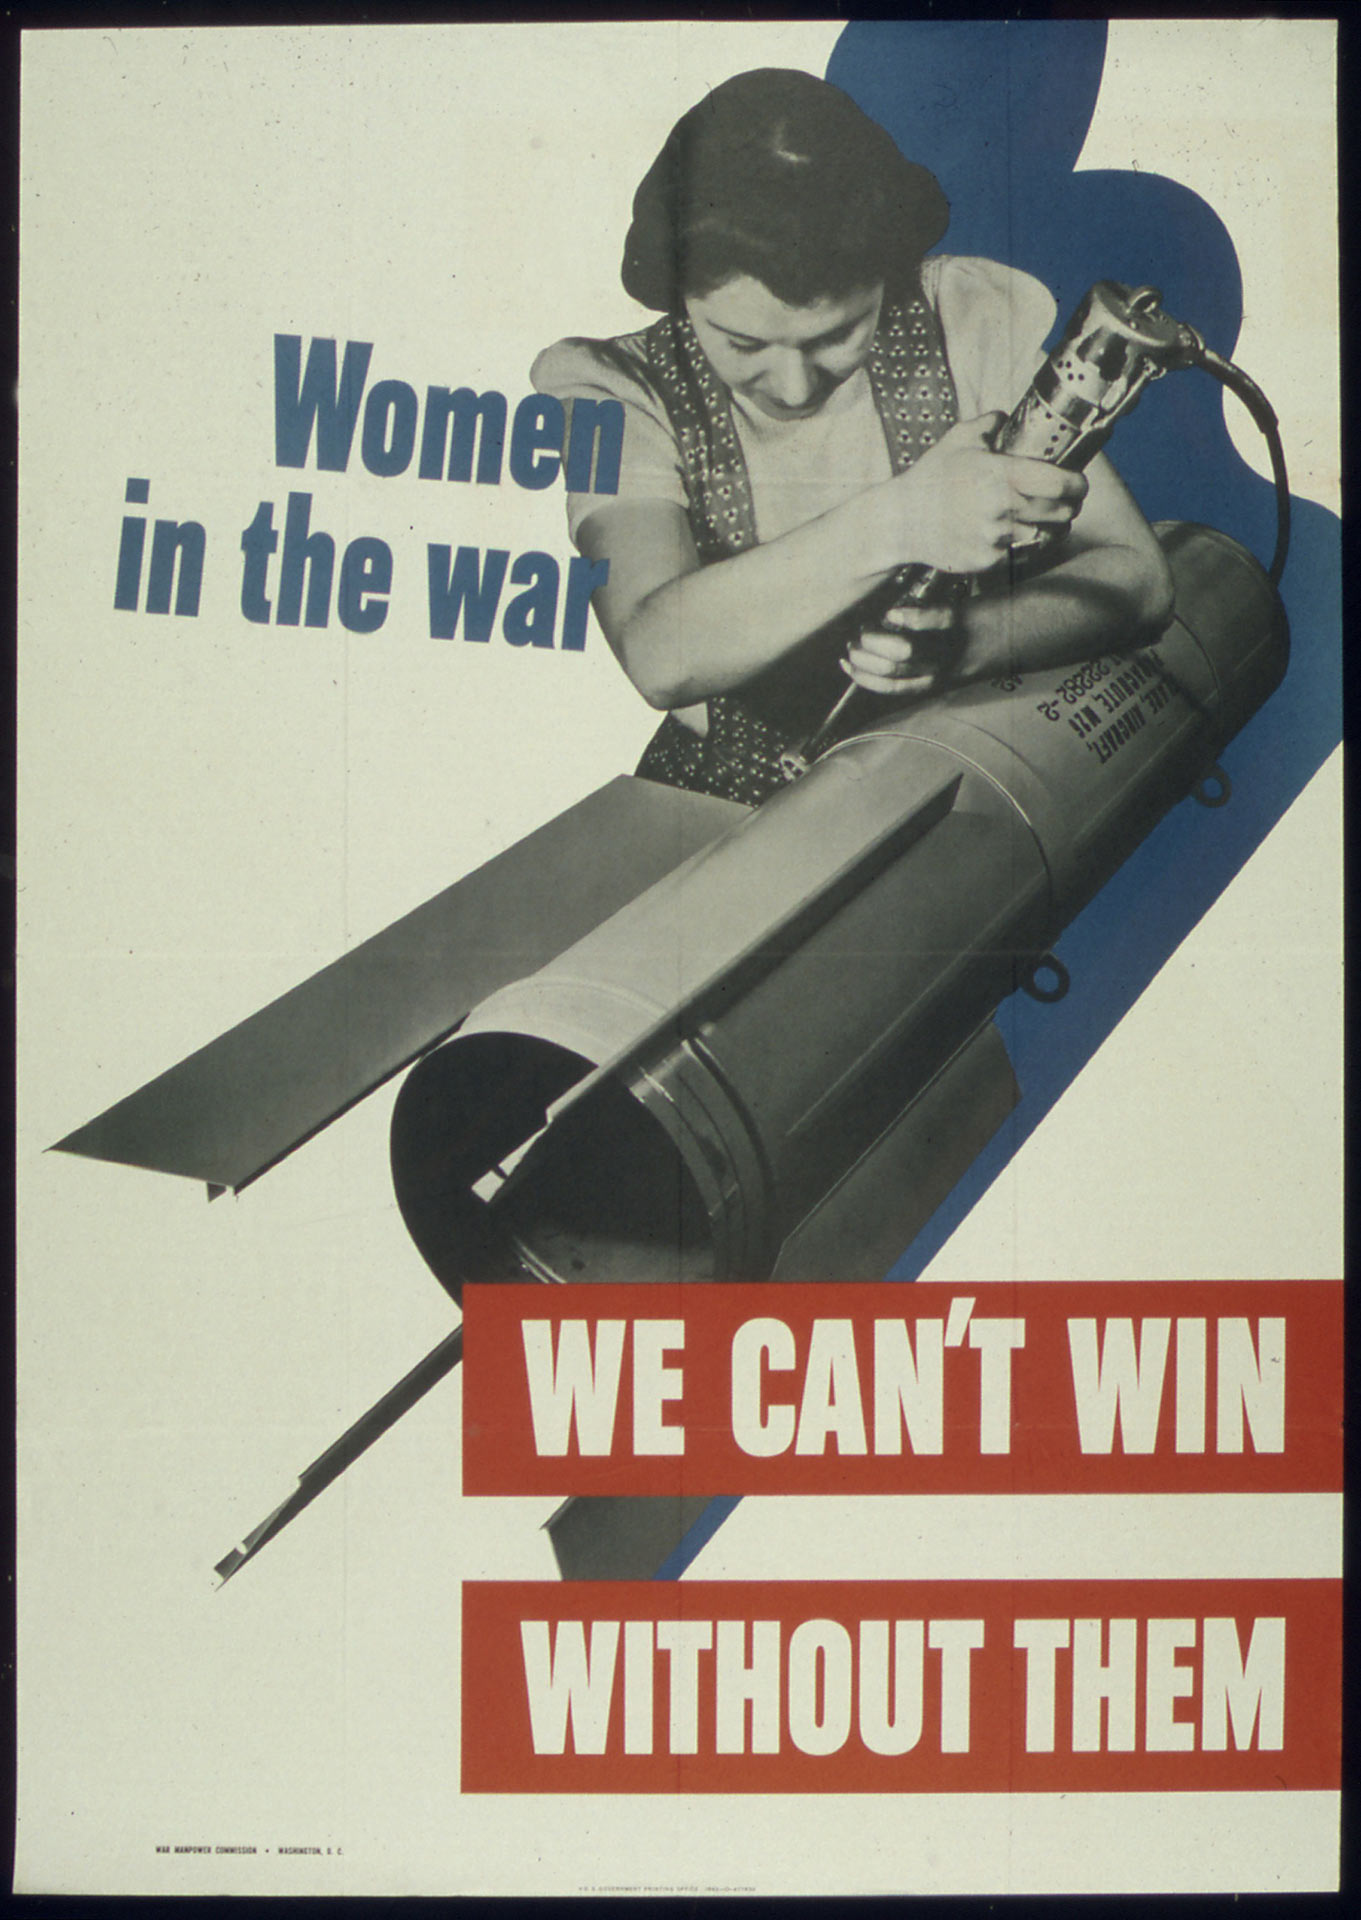 Women in the War: We Can't Win Without Them